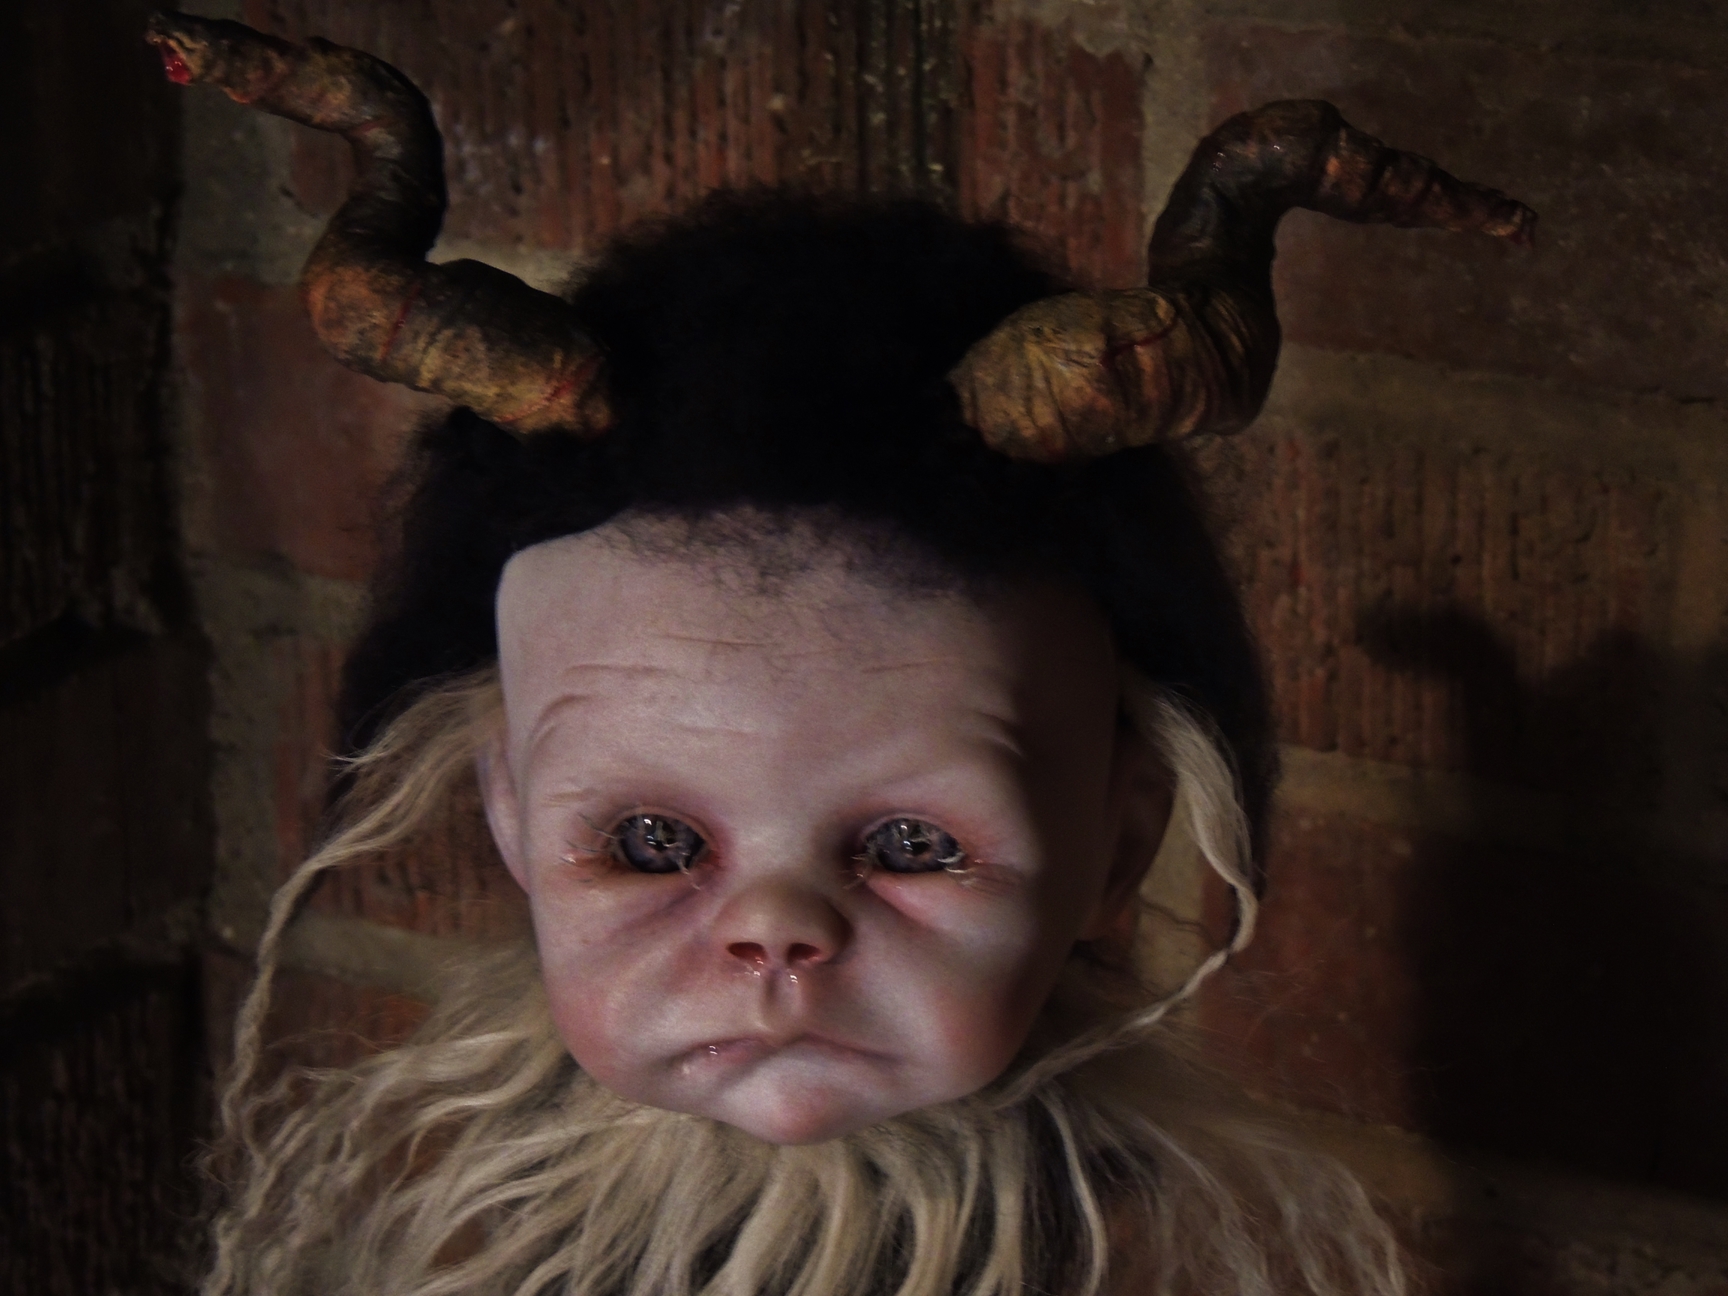 mixed media artdoll has hand-painted vinyl dollhead scrunched face with hand-sculpted horns, covered in black mohair fur